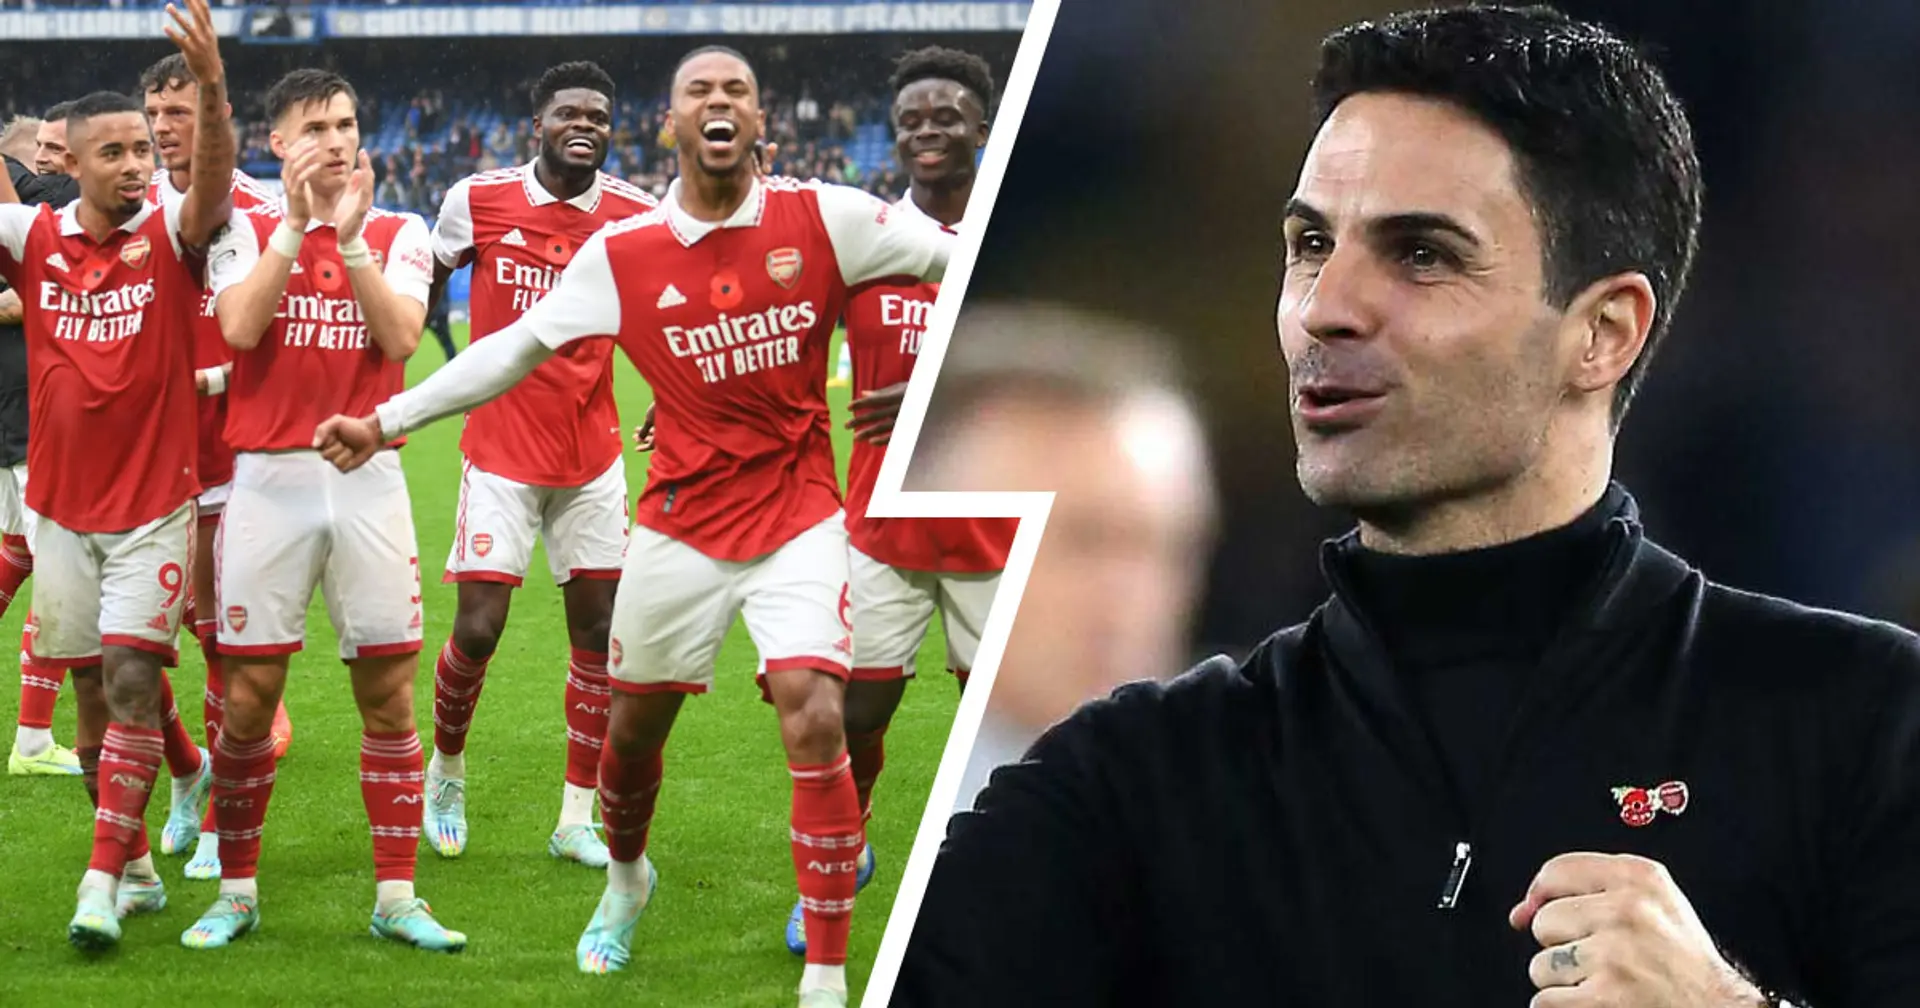 Arsenal to take part in Dubai Super Cup & 3 more big stories you might've missed